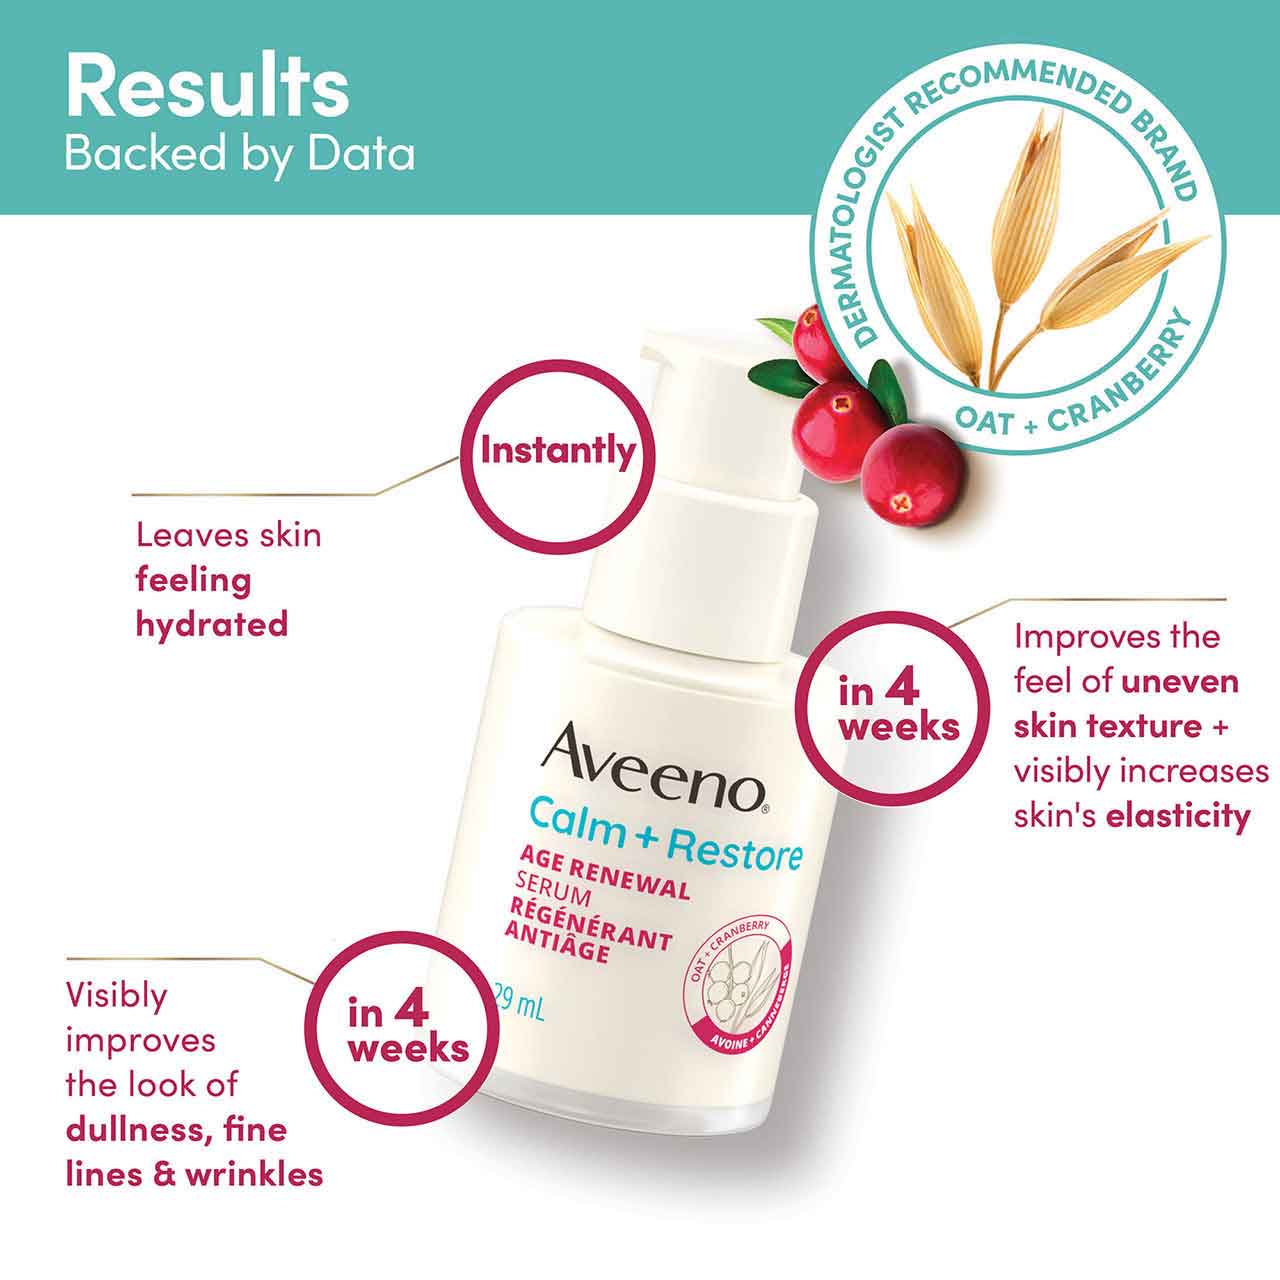 Benefits of using AVEENO® Calm + Restore Age Renewal Serum, backed by data, for 12 weeks.